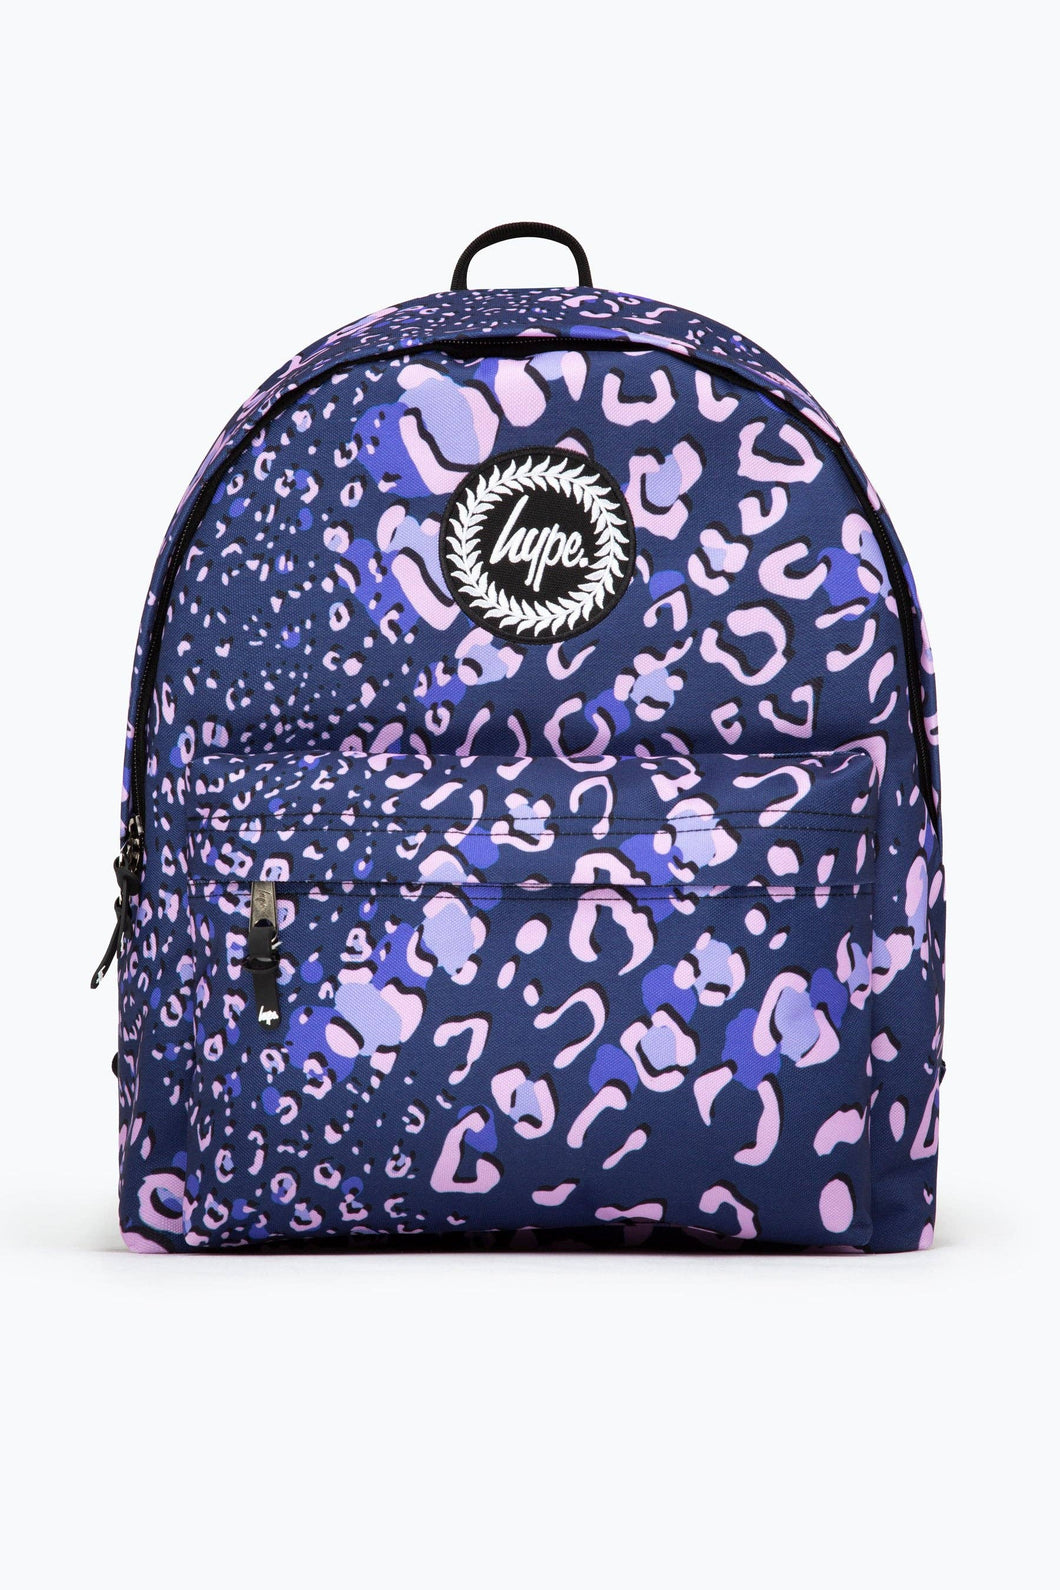 Hype - HYPE PURPLE & LILAC ANIMAL PRINT BACKPACK